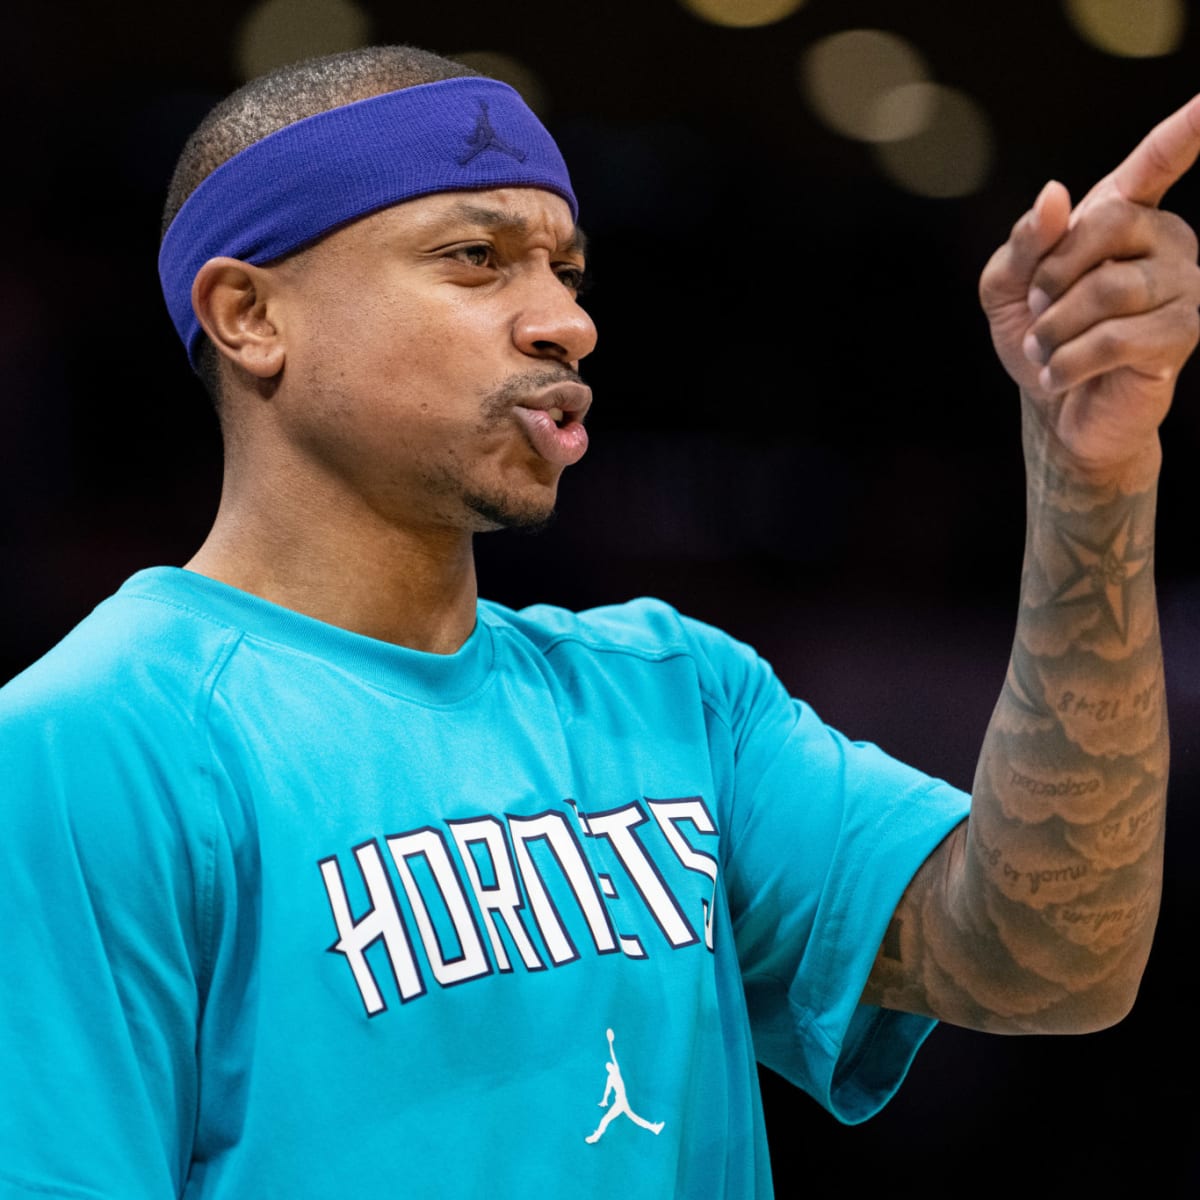 Two time NBA All-Star Isaiah Thomas wants to give back through